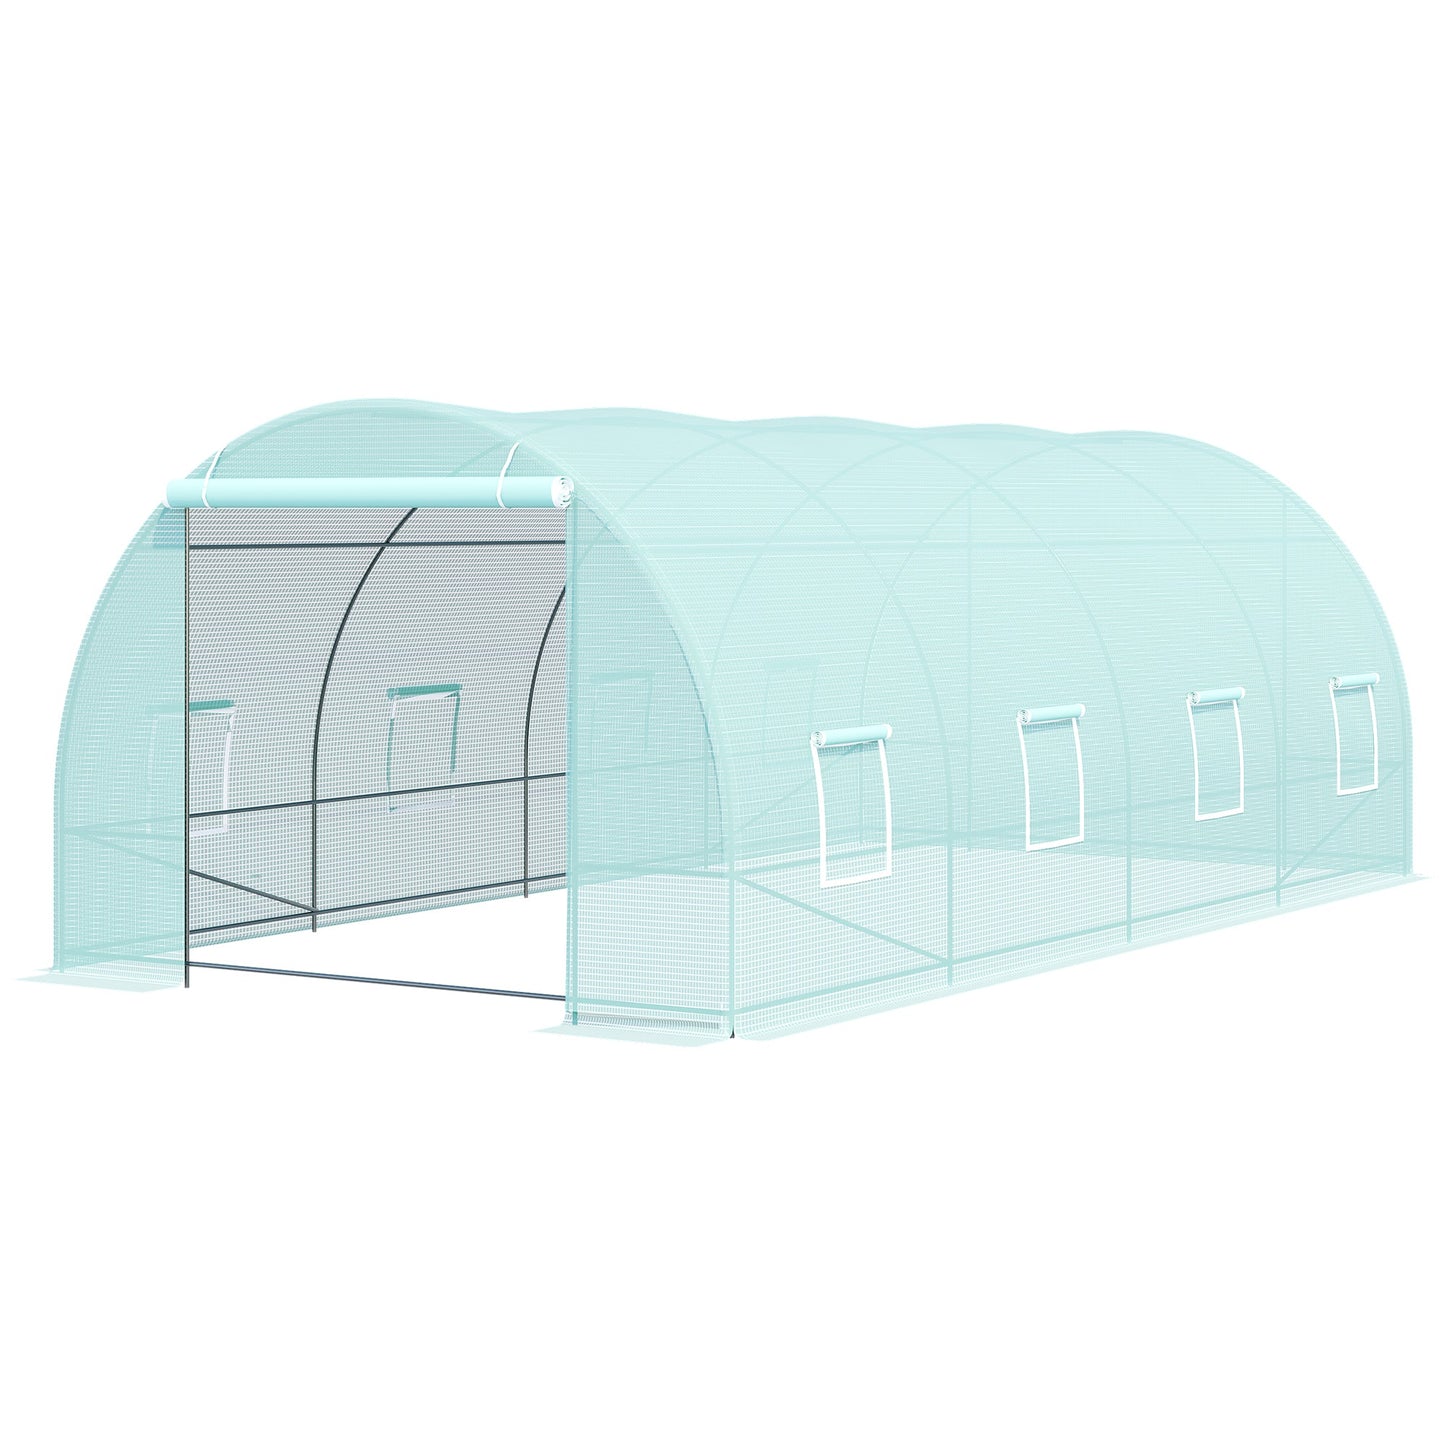 Outdoor and Garden-20’ x 10’ x 7’ Freestanding High Tunnel Walk-In Garden Greenhouse Kit - Green - Outdoor Style Company